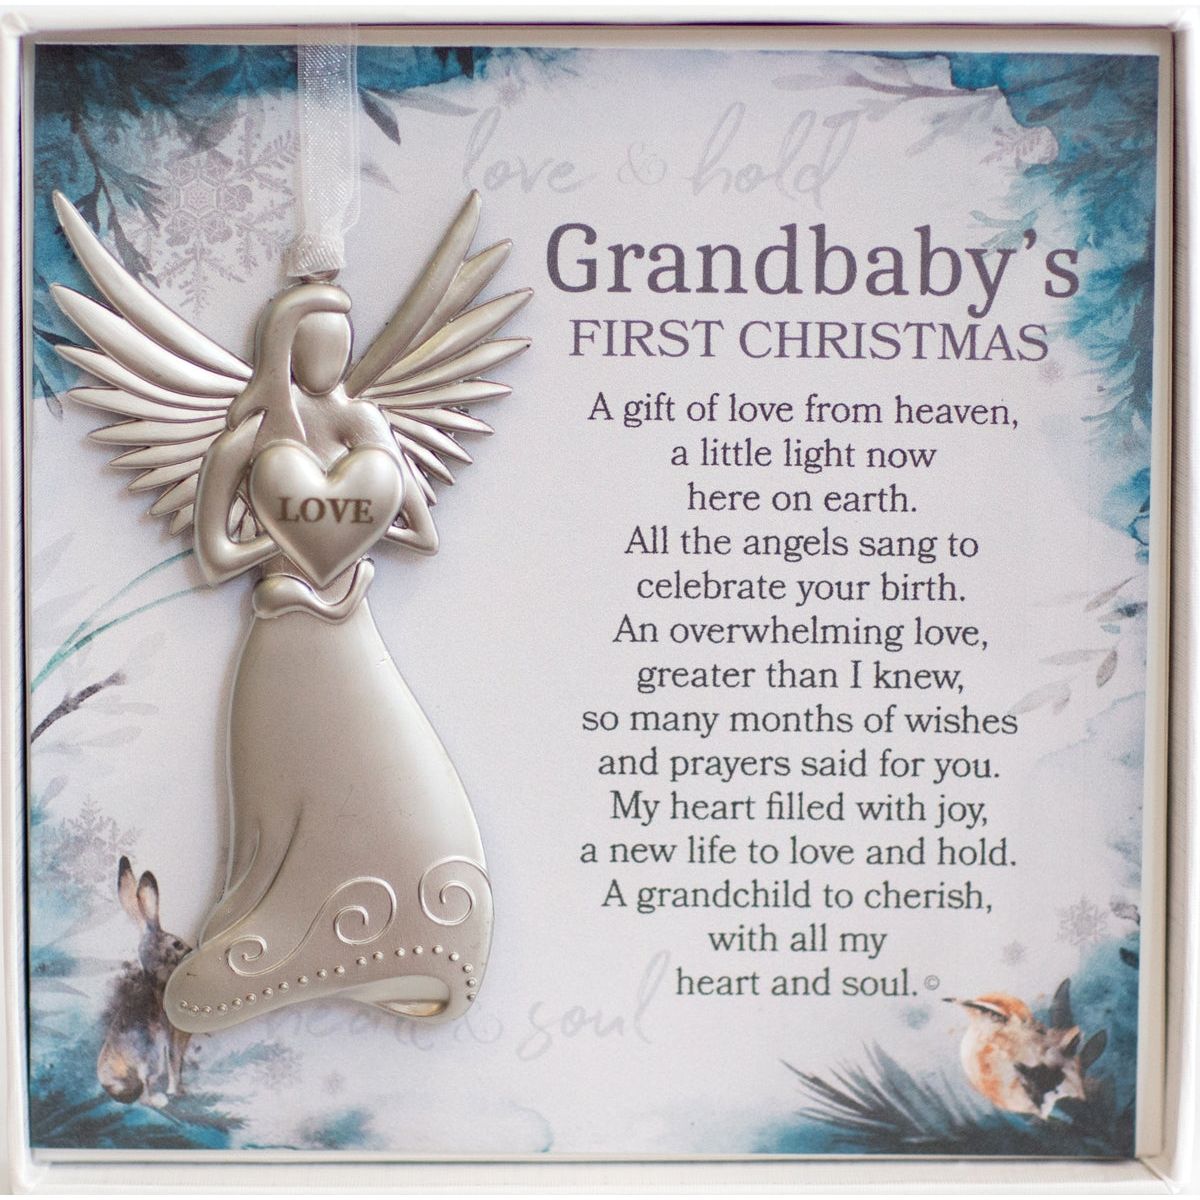 4" metal love angel ornament with "Grandbaby's First Christmas" sentiment in white box with clear lid.